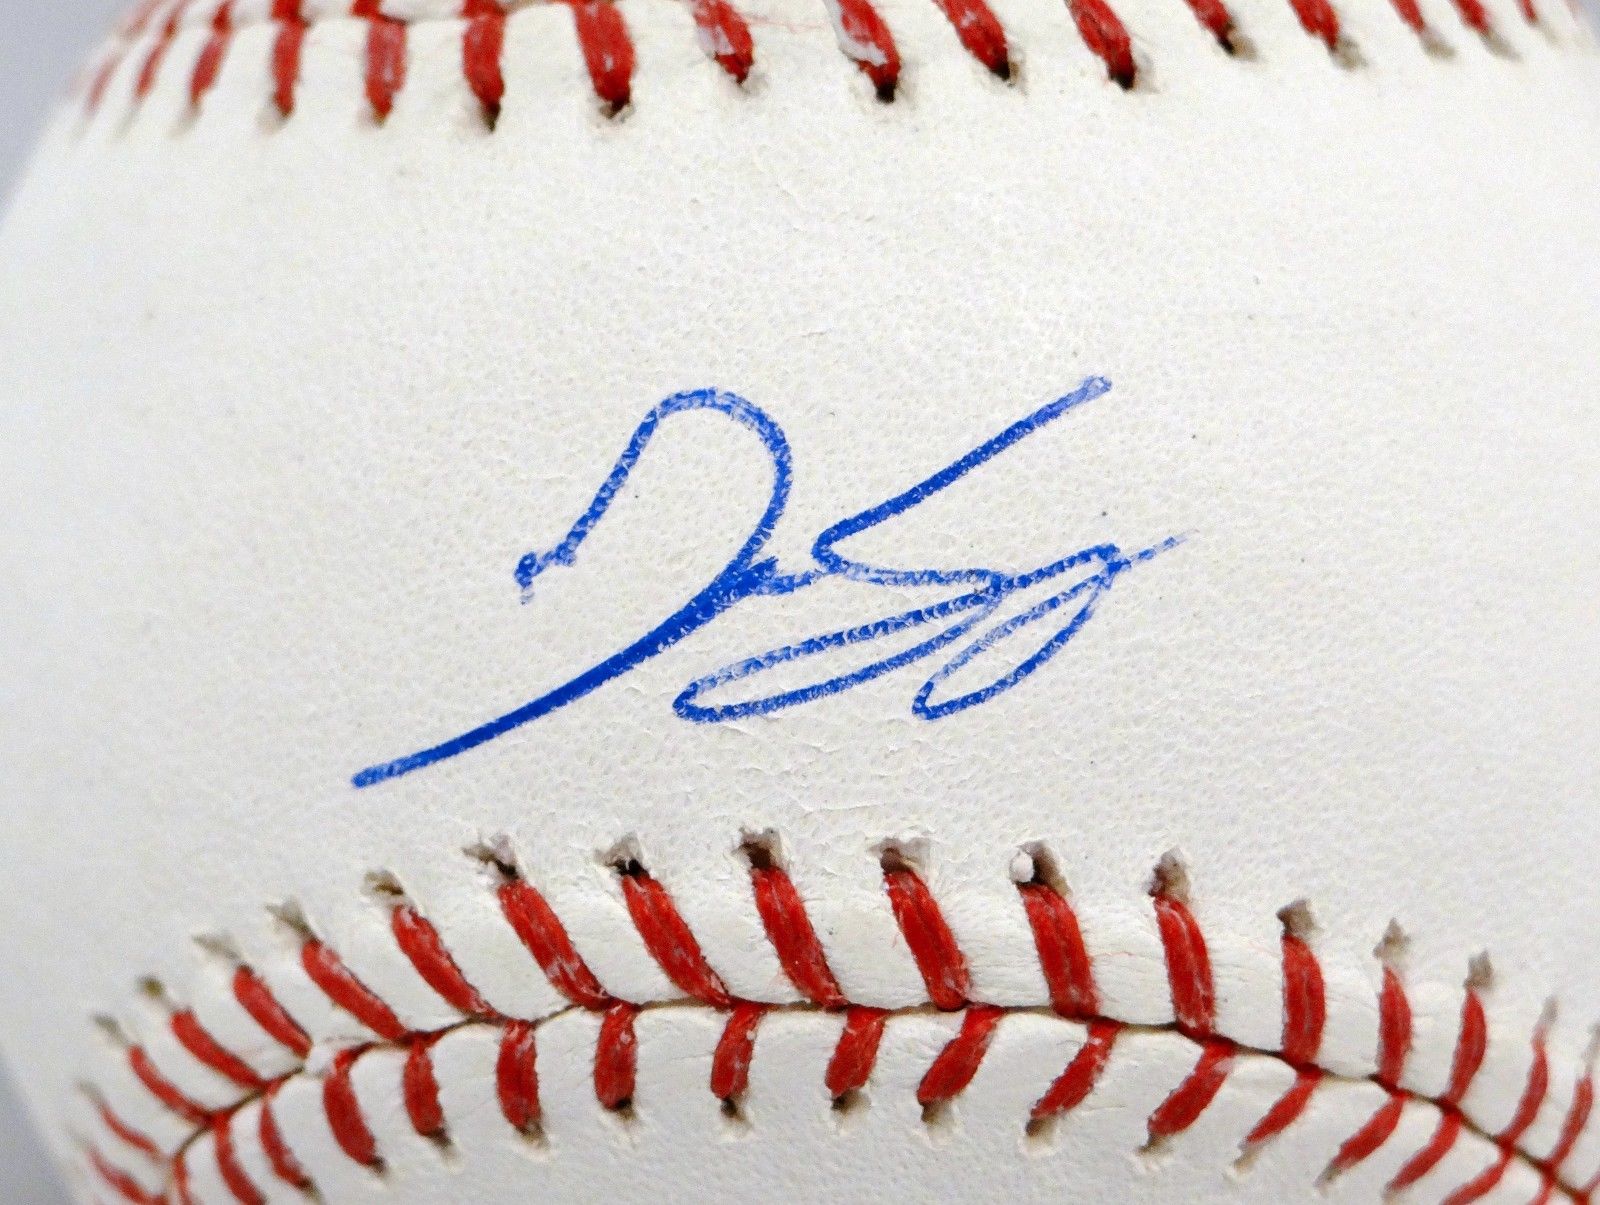 George Springer Autographed Signed Rawlings Official Major League Baseball  - Autographs